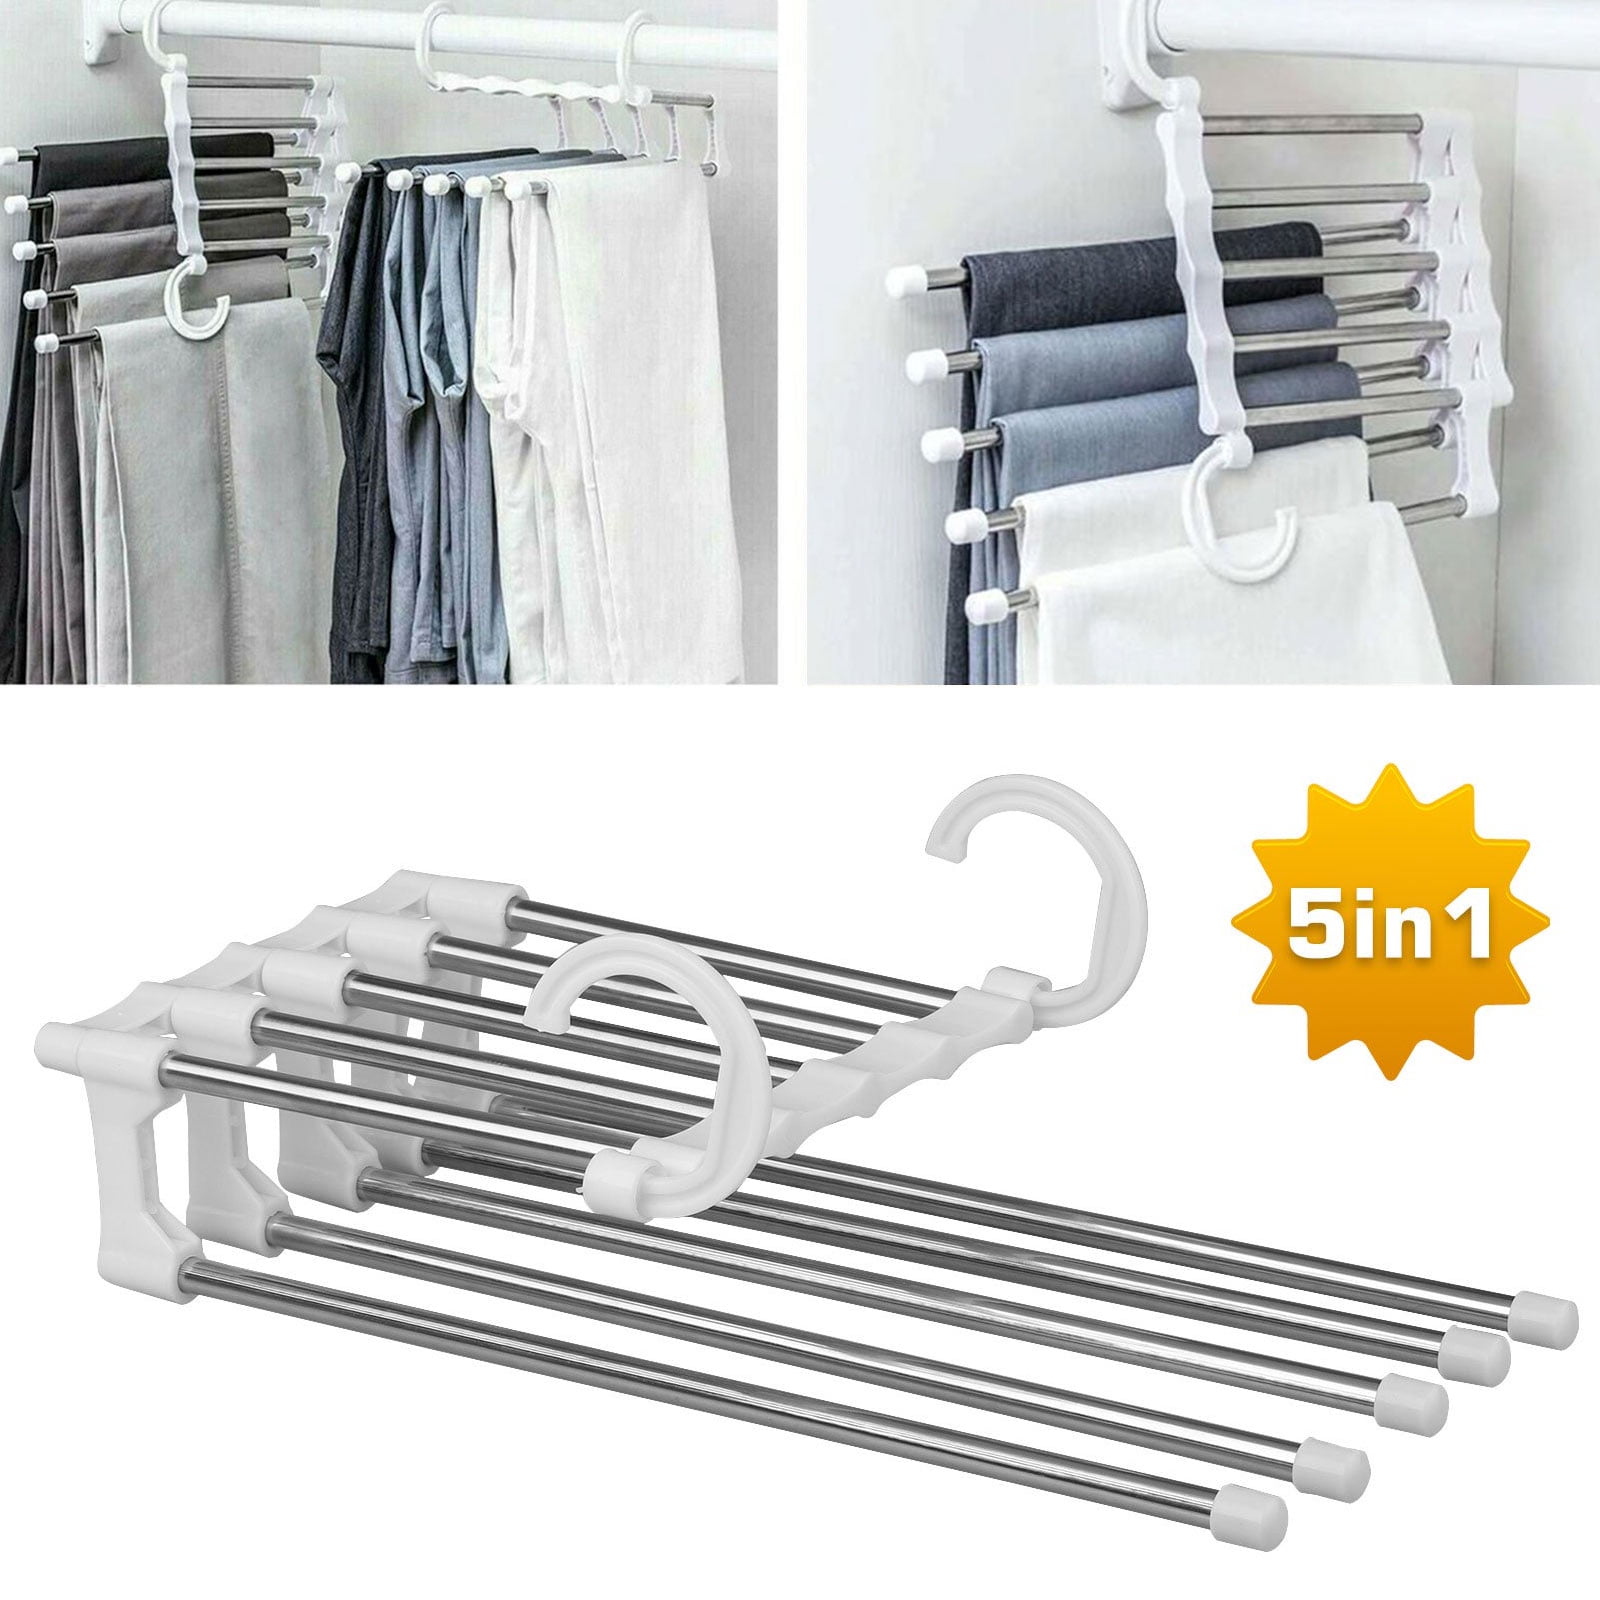 Eityilla S Type Clothes Pants Hangers Stainless Steel Space Saving Hangers 5 Lay 